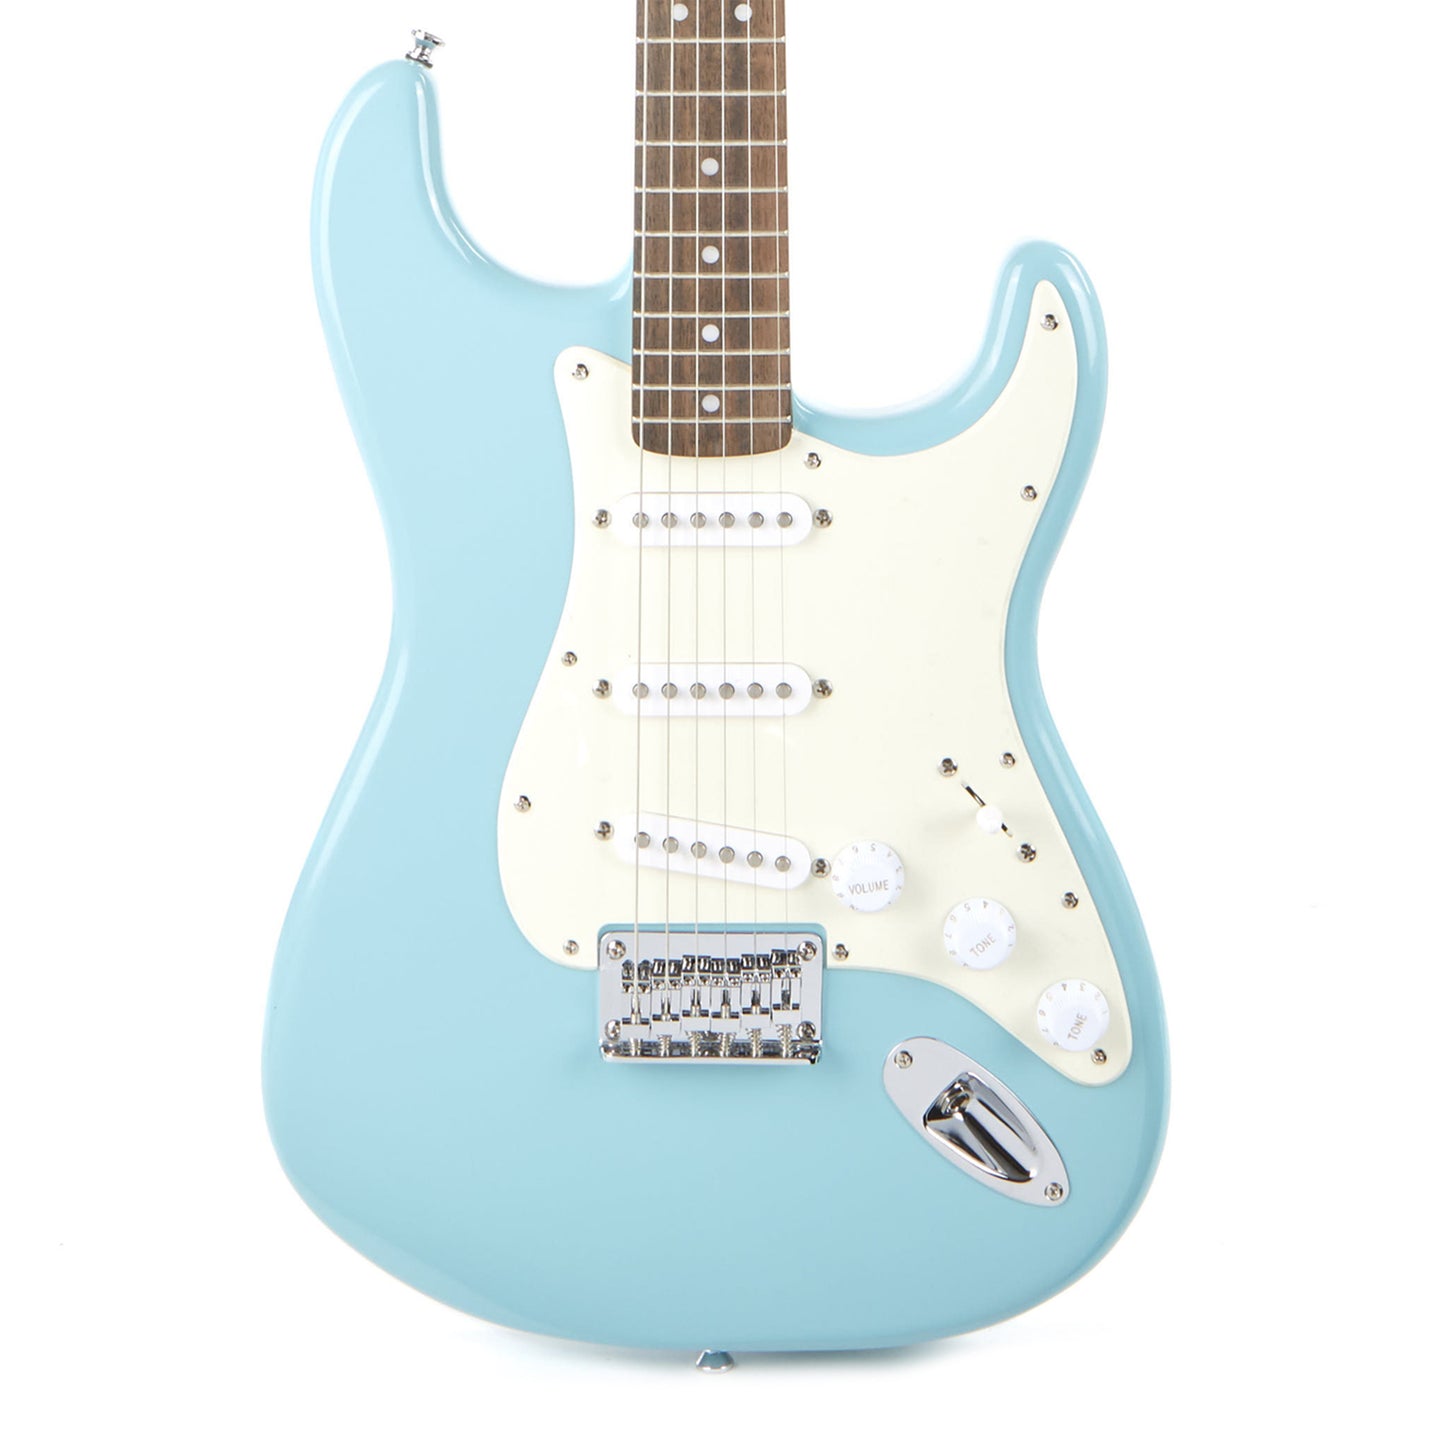 Squier Bullet Stratocaster Hardtail Electric Guitar, Laurel FB, Tropical Turquoise